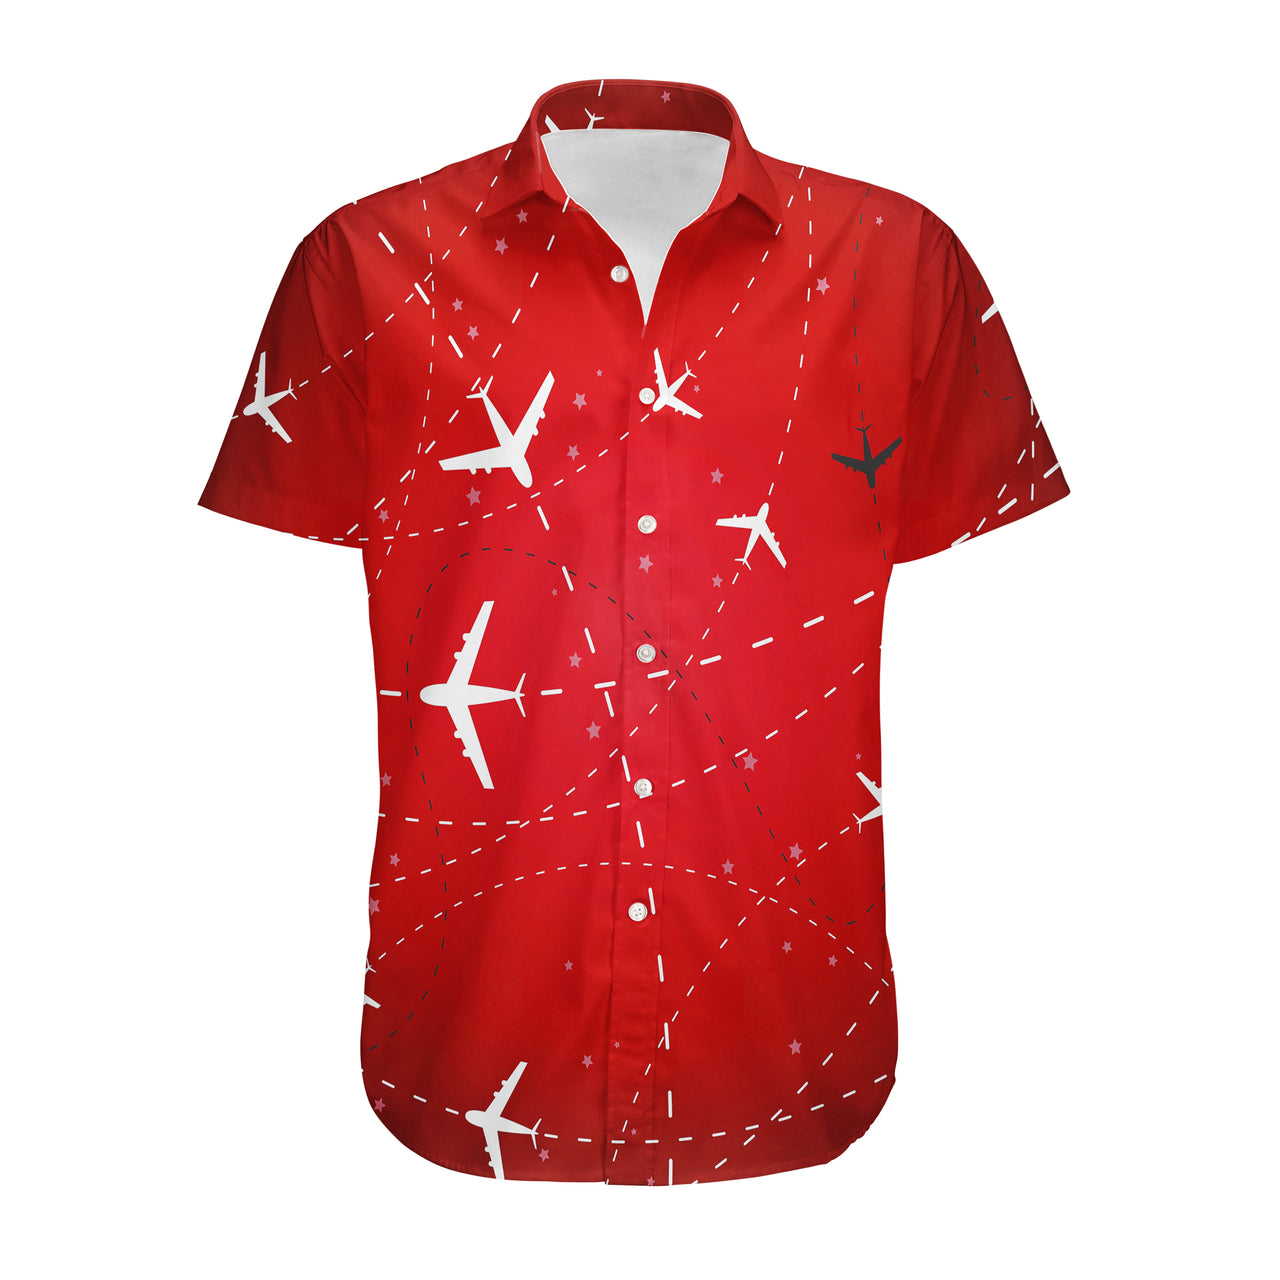 Travelling with Aircraft (Red) Designed 3D Shirts